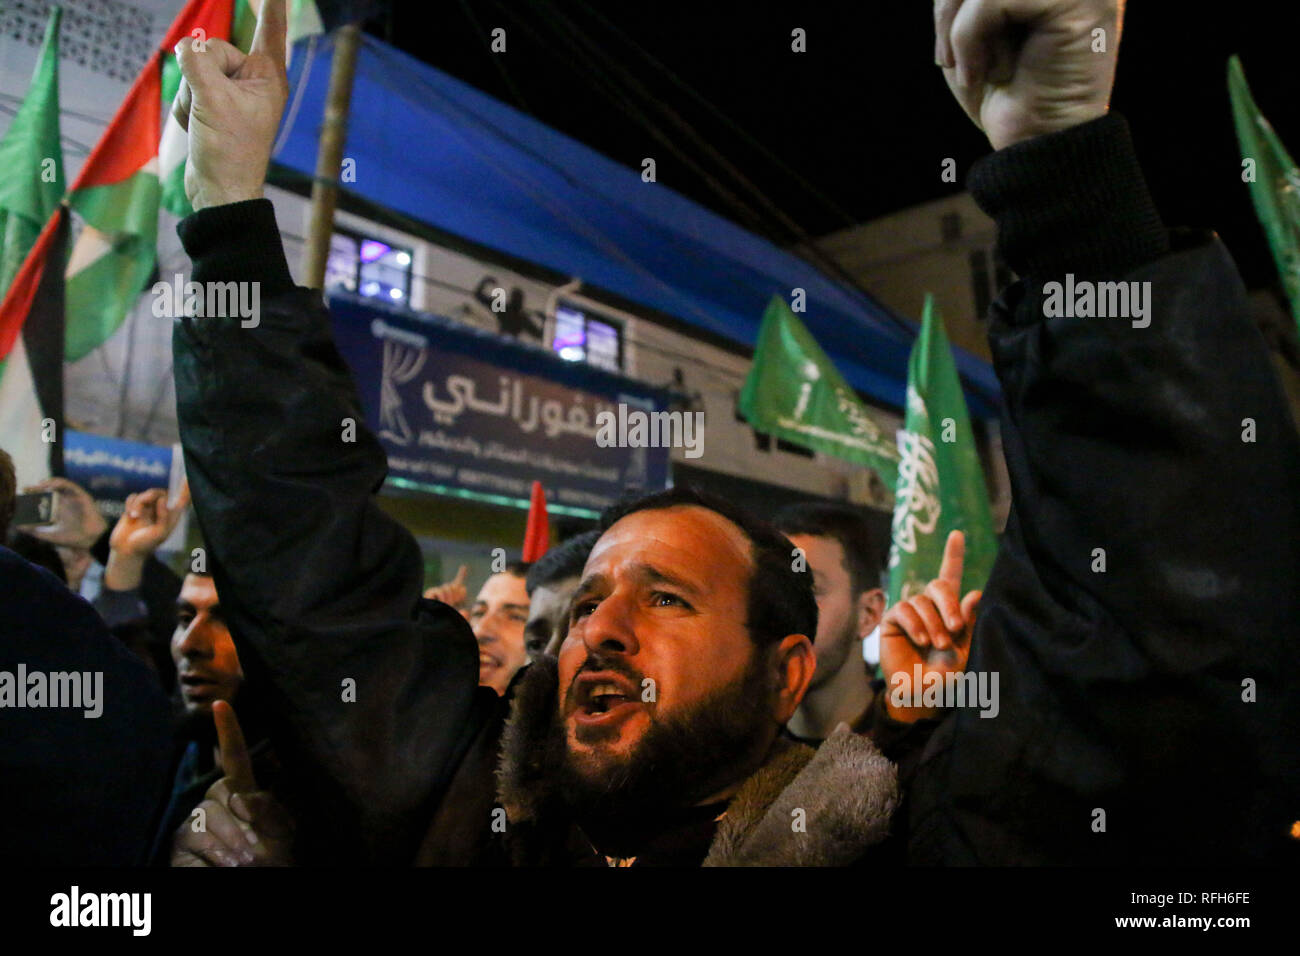 A protester seen shouting slogans during the rally. The Islamic Resistance Movement of Hamas organizes a mass rally in Gaza City in solidarity with the Palestinian prisoners detained in Israeli jails. Stock Photo